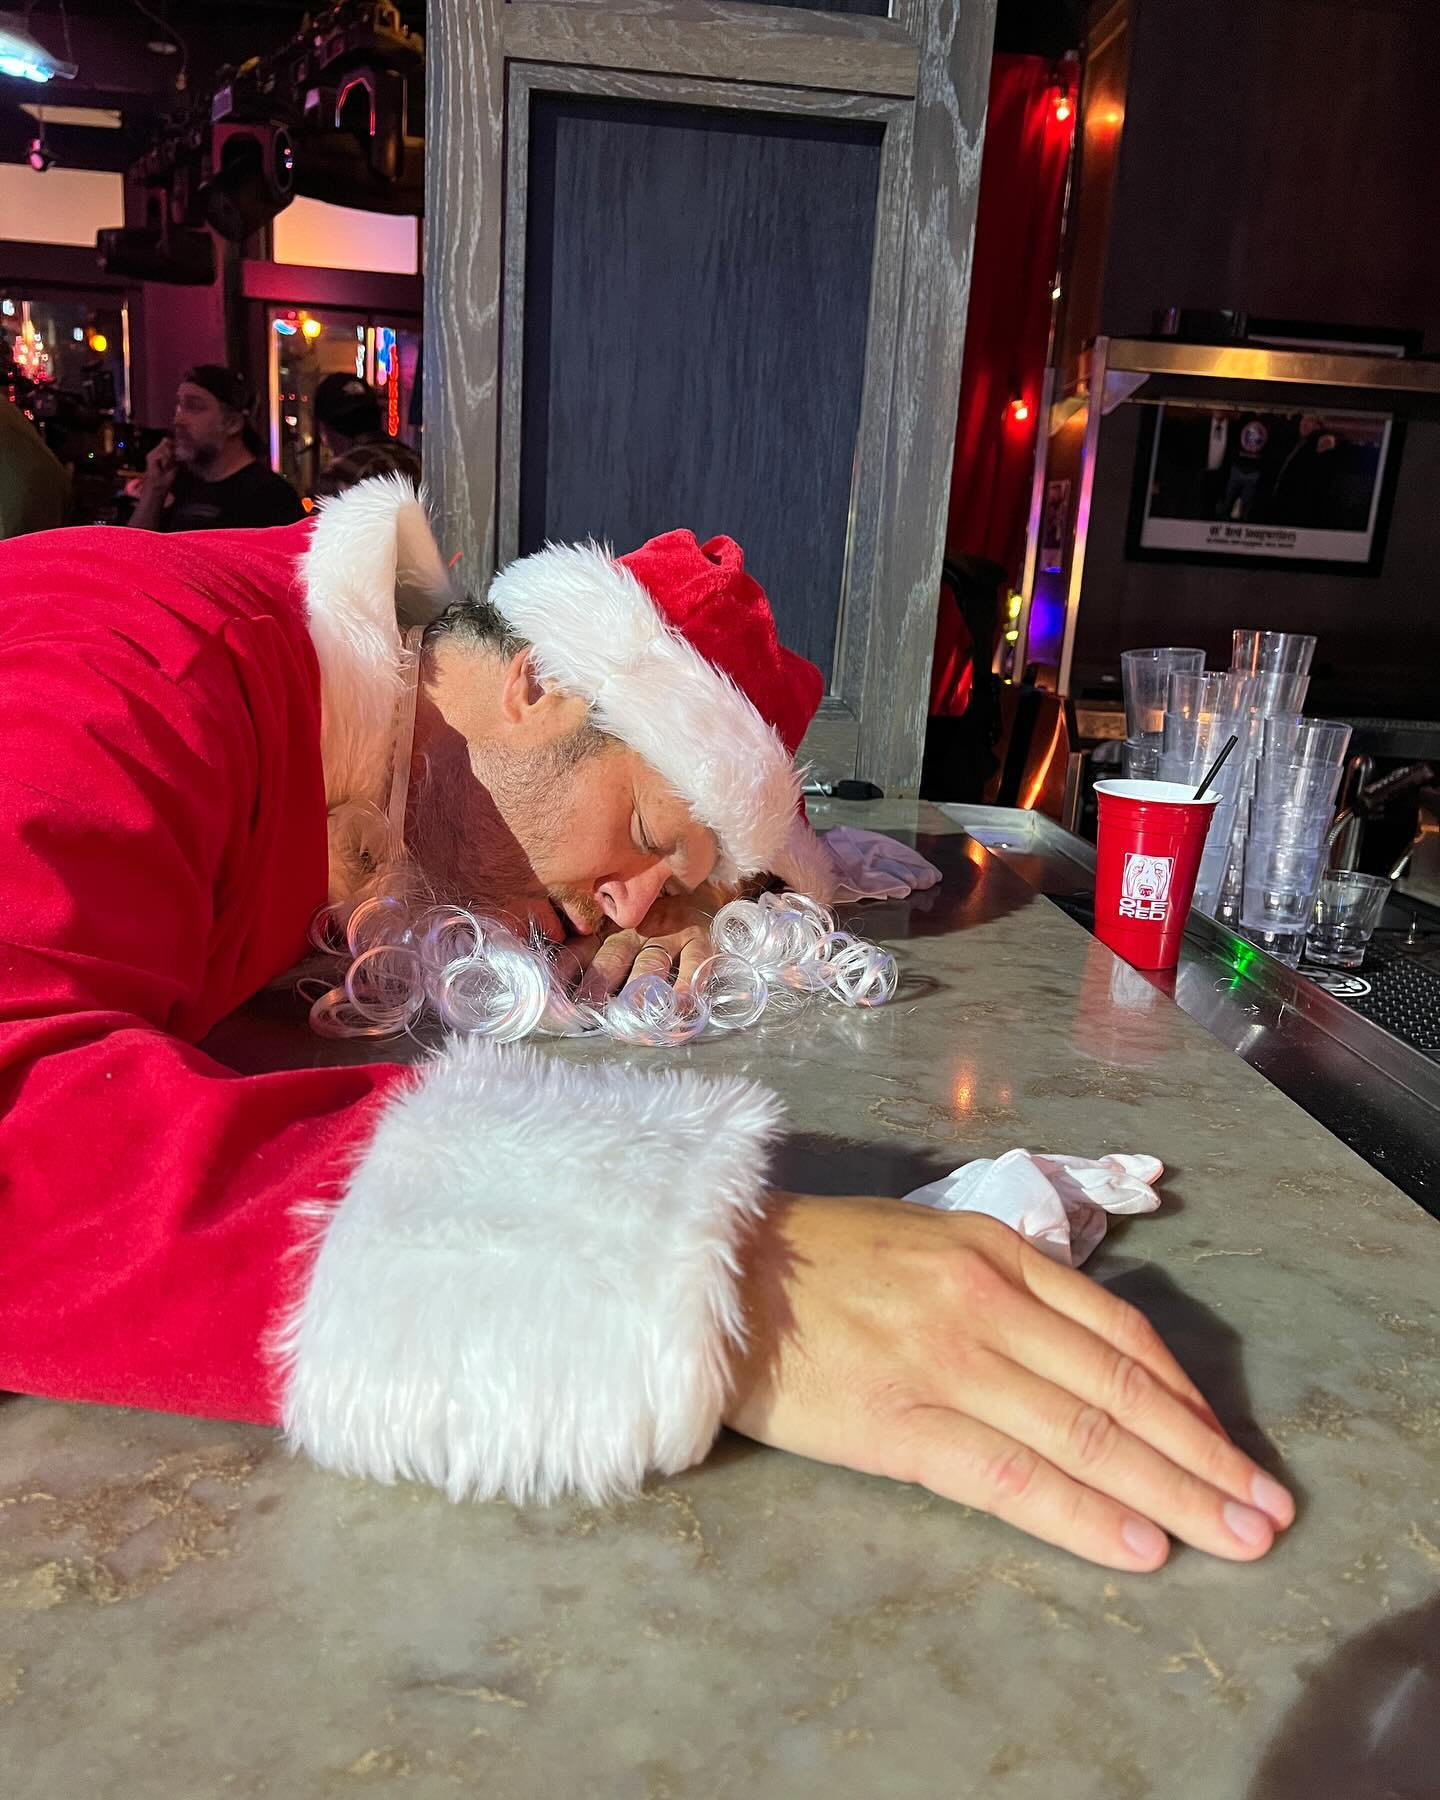 Blake posted a photo of himself pretending to be passed out at his bar on Christmas